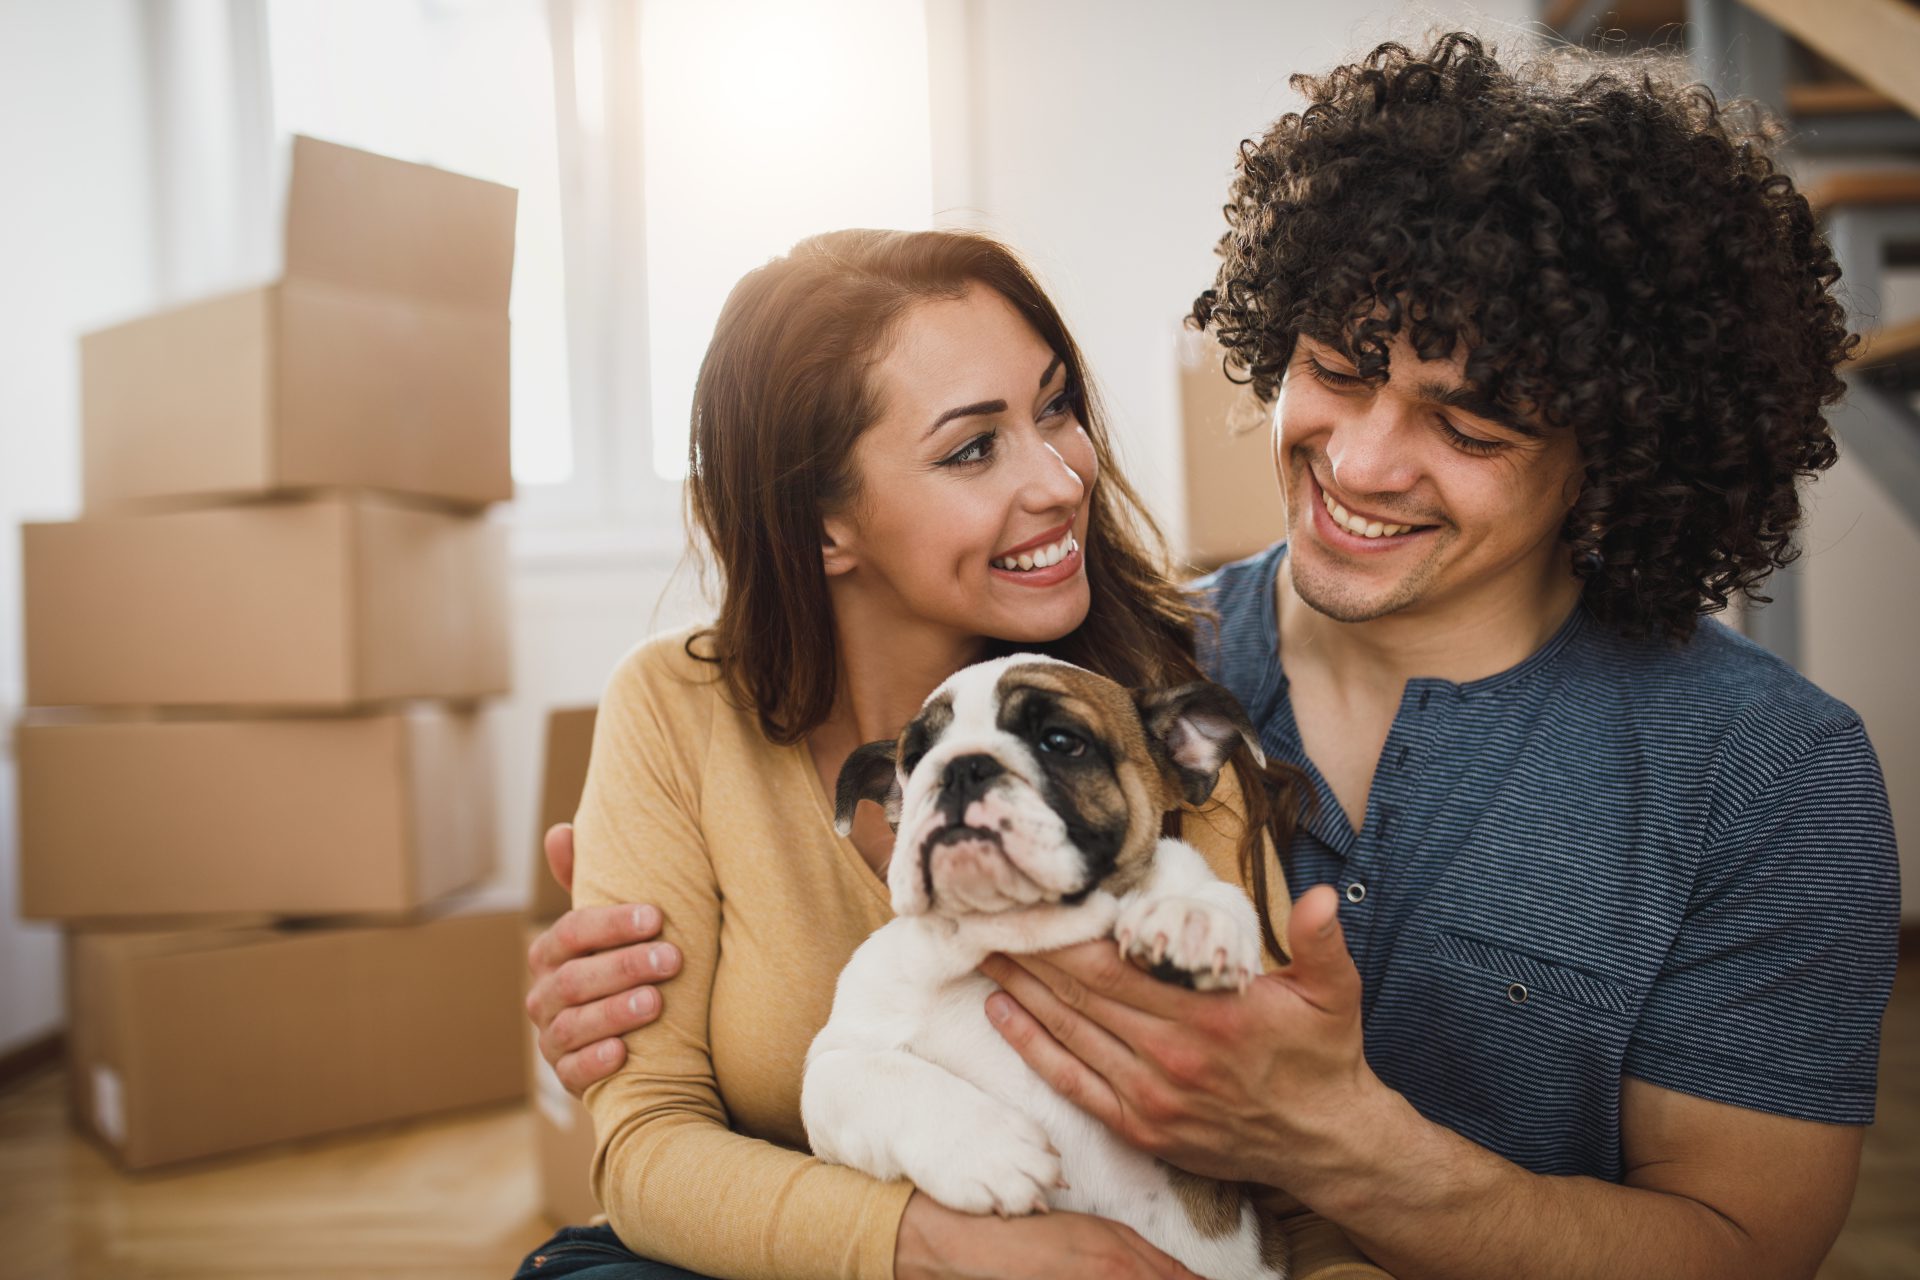 Moving to a Shared Ownership property when you own pets